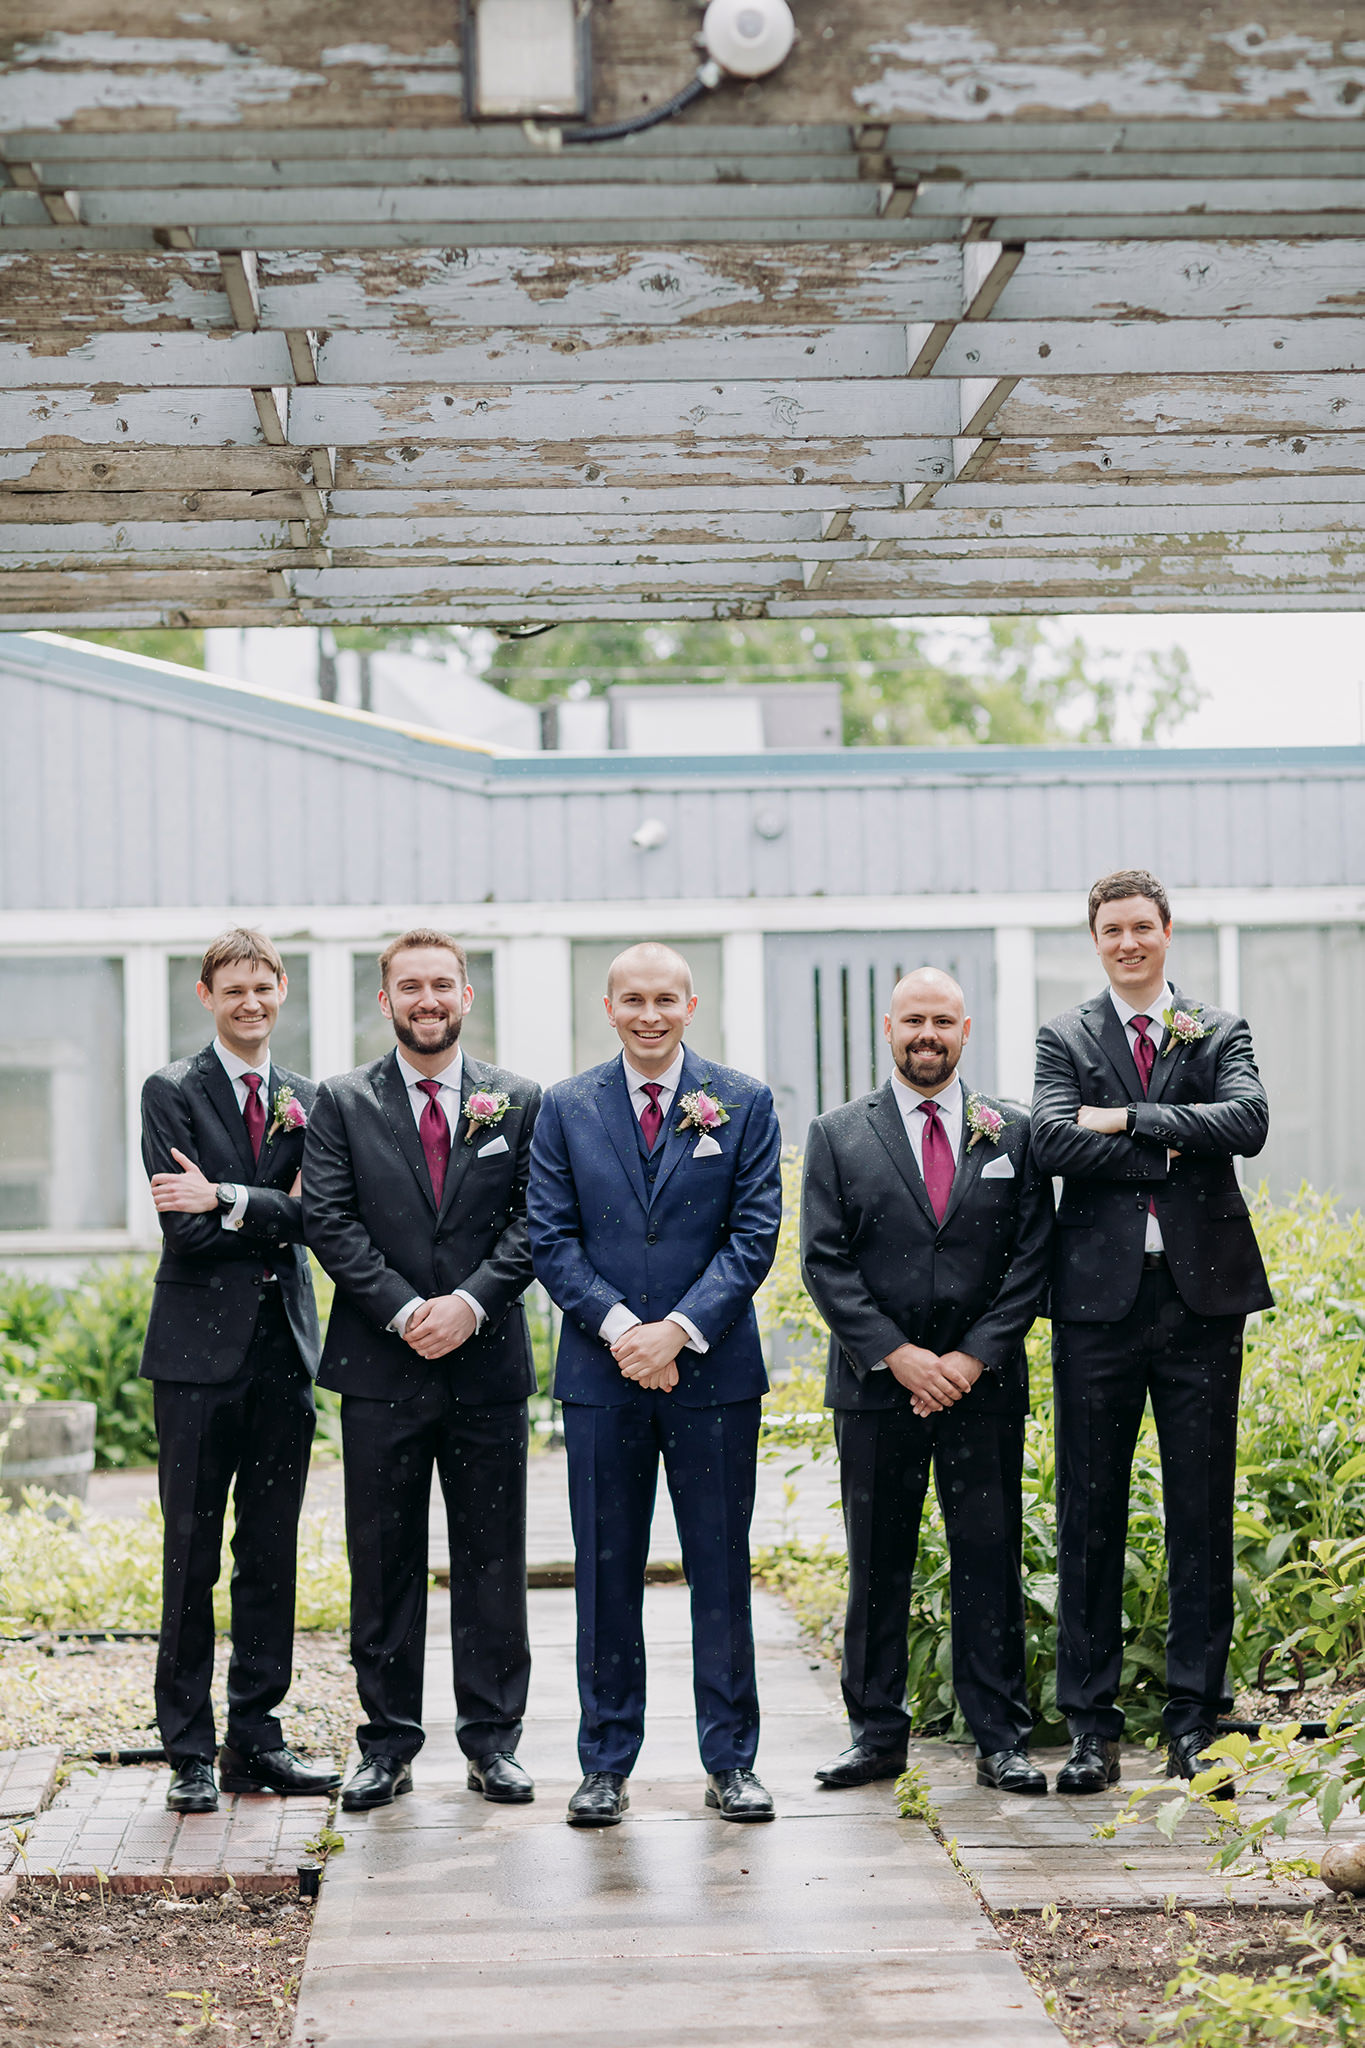 Calgary intimate wedding party portraits in the city with groomsmen